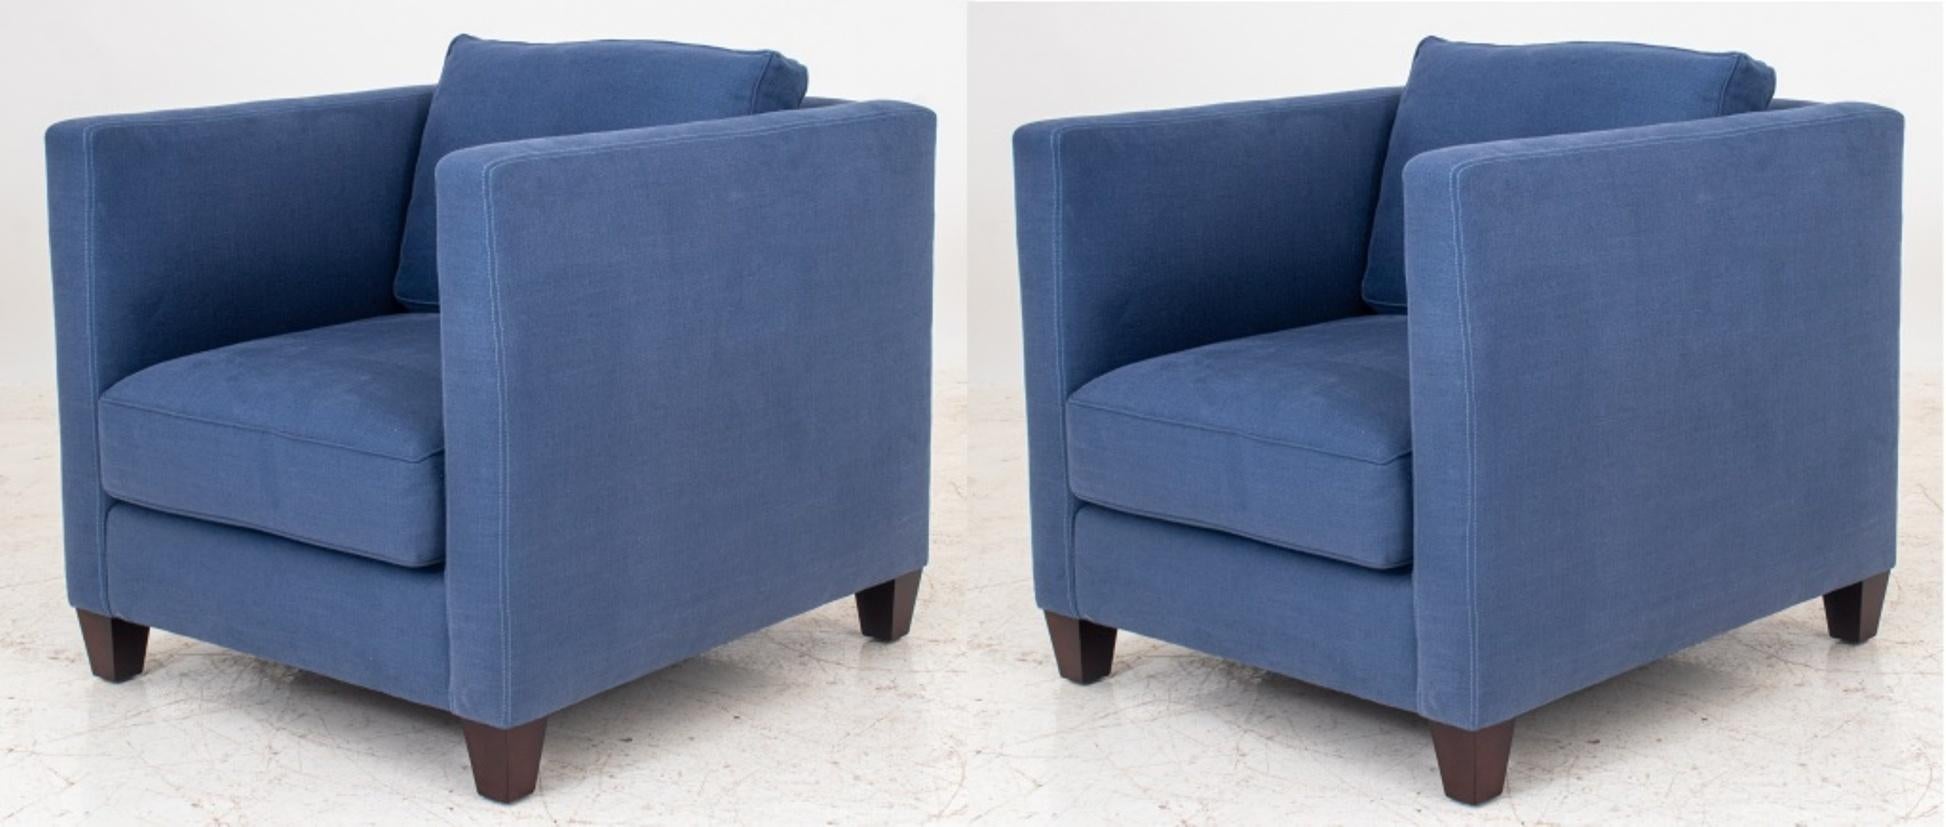 Pair of modern square-form upholstered arm chairs, each with square back and drop in back and seat cushion, upholstered in navy blue linen, on tapering block feet. Measures: 30